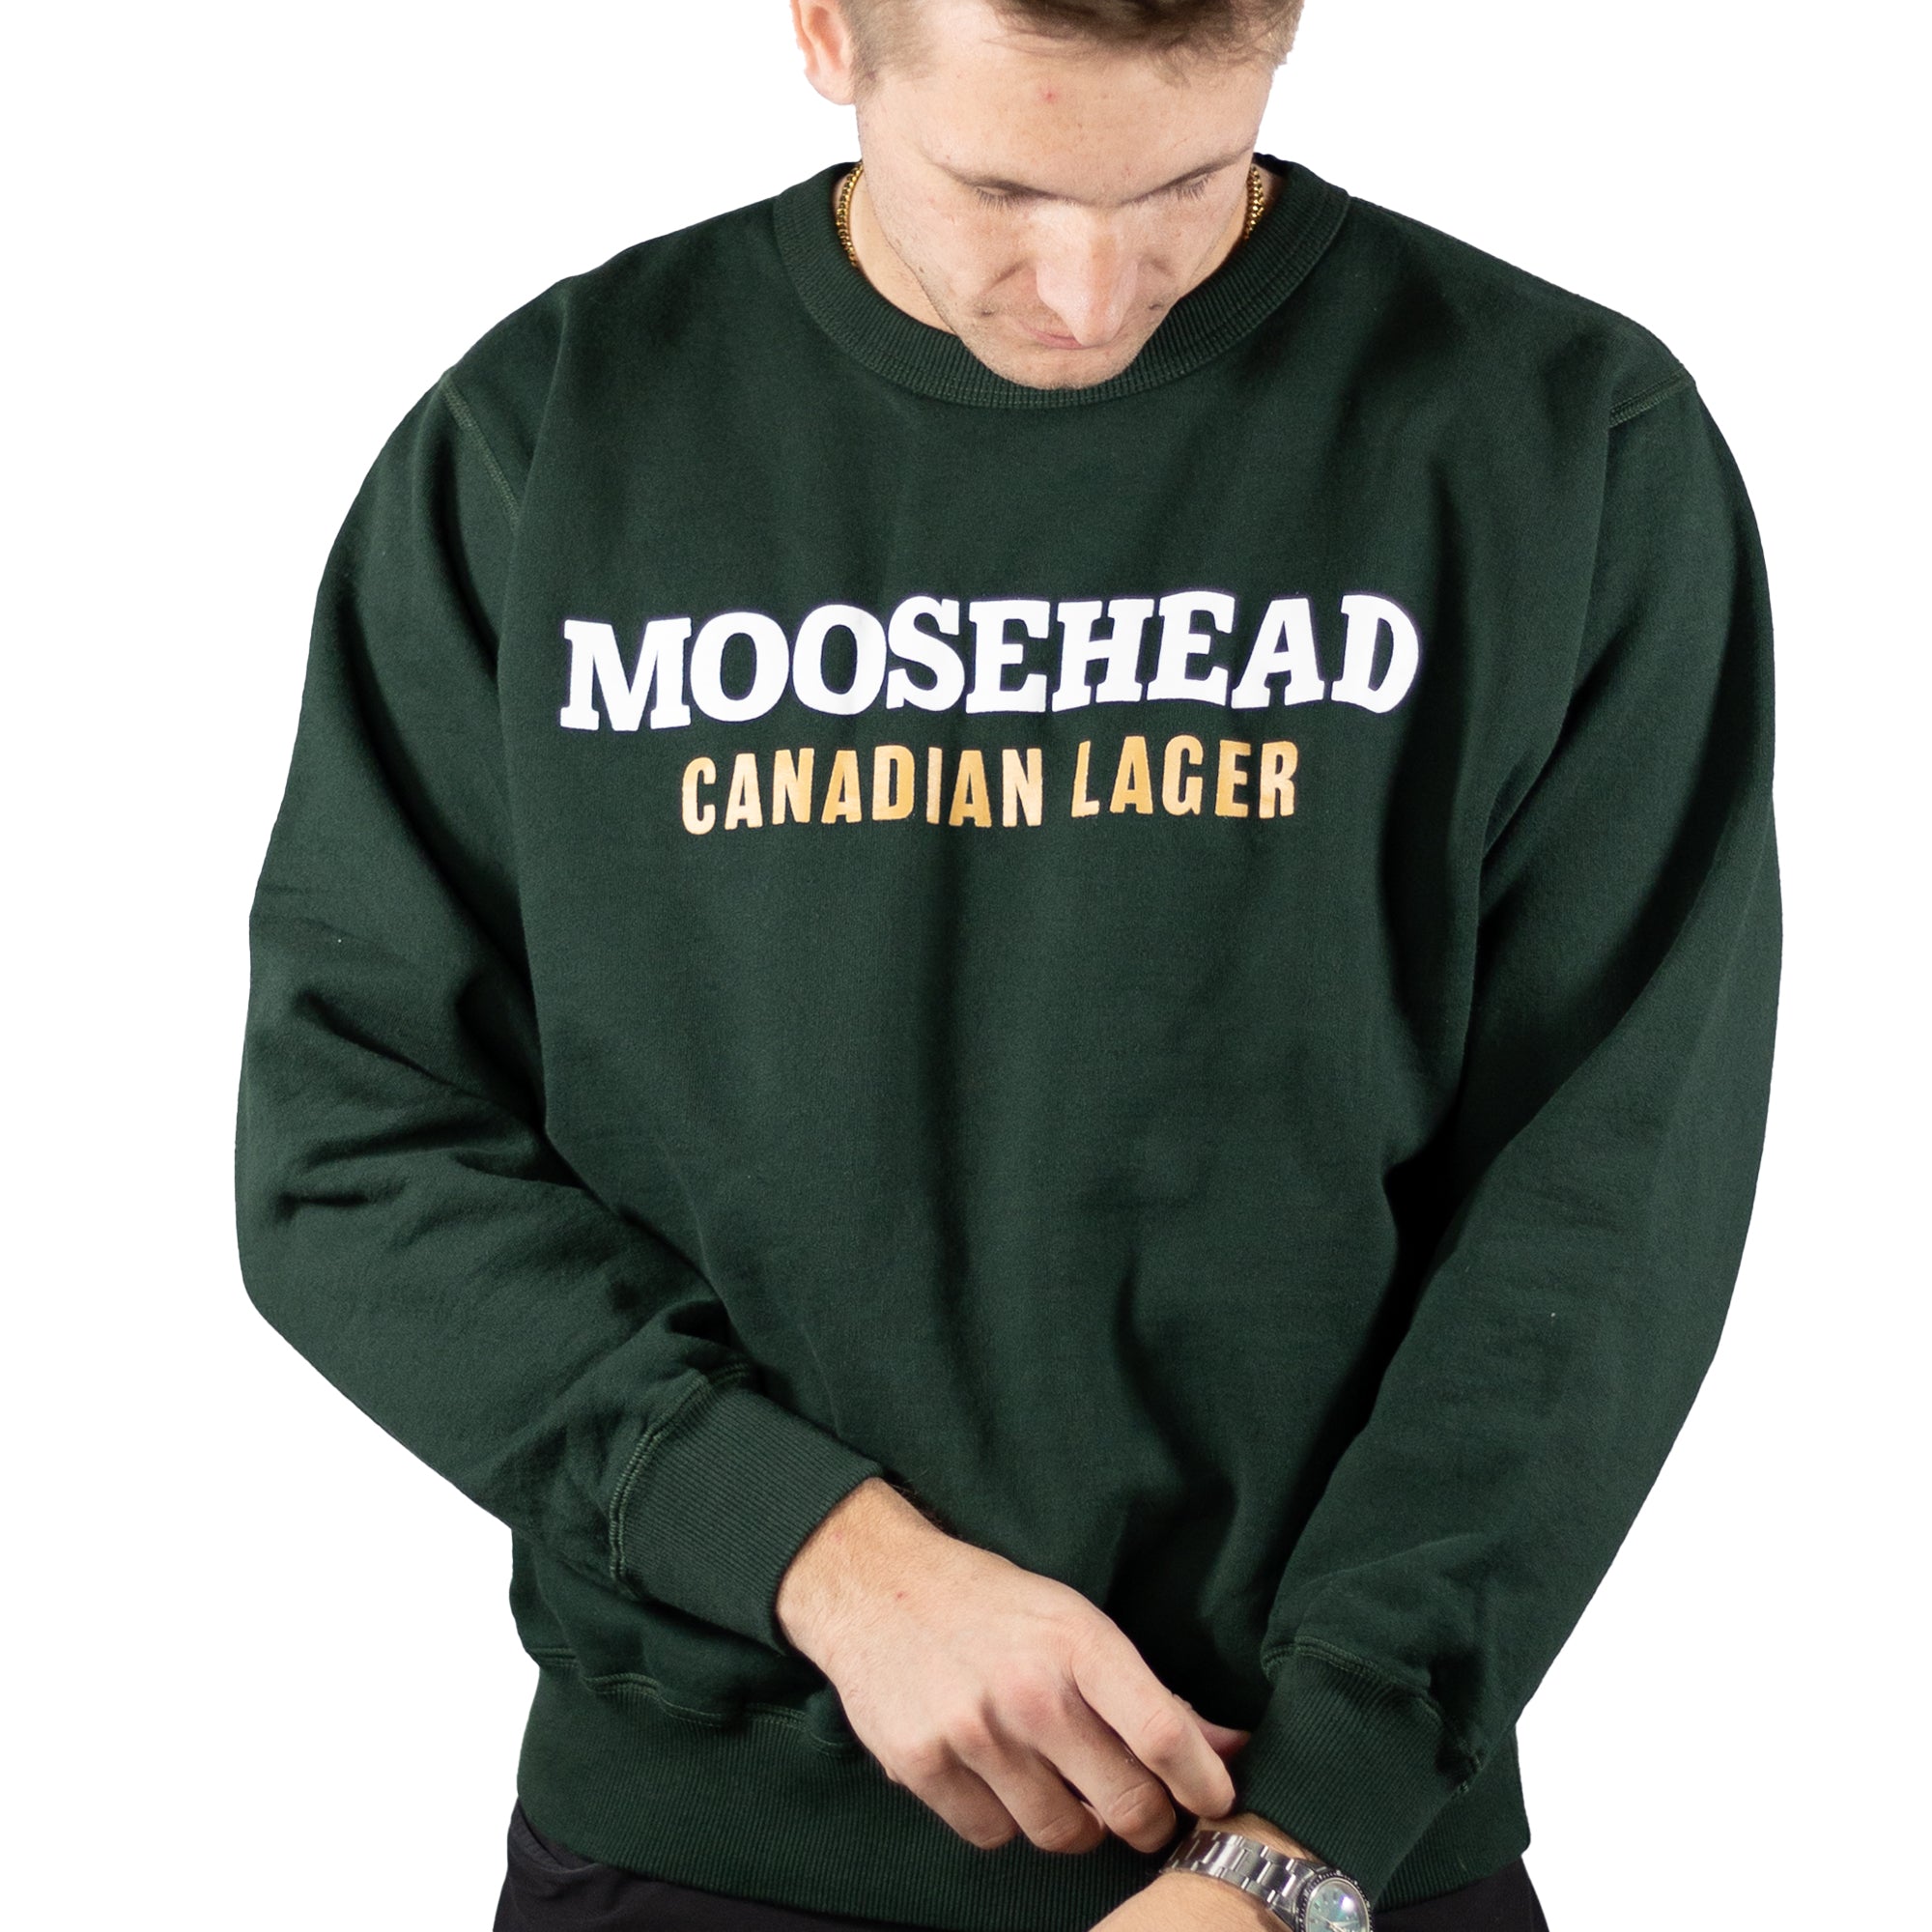 Moosehead Canadian Lager Crew